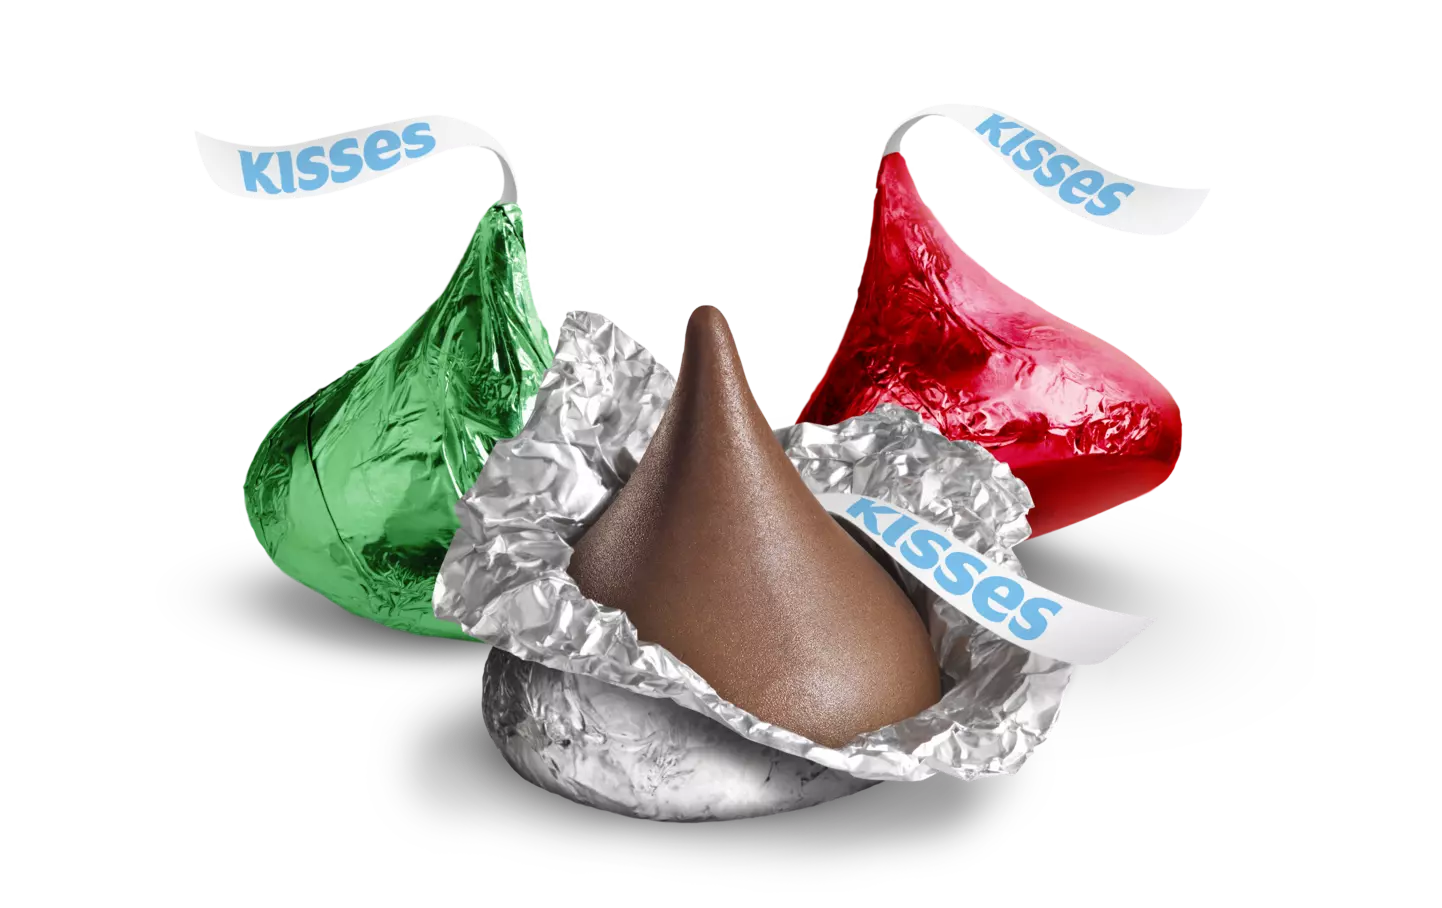 HERSHEY'S KISSES Holiday Milk Chocolate Candy, 10.1 oz bag - Out of Package